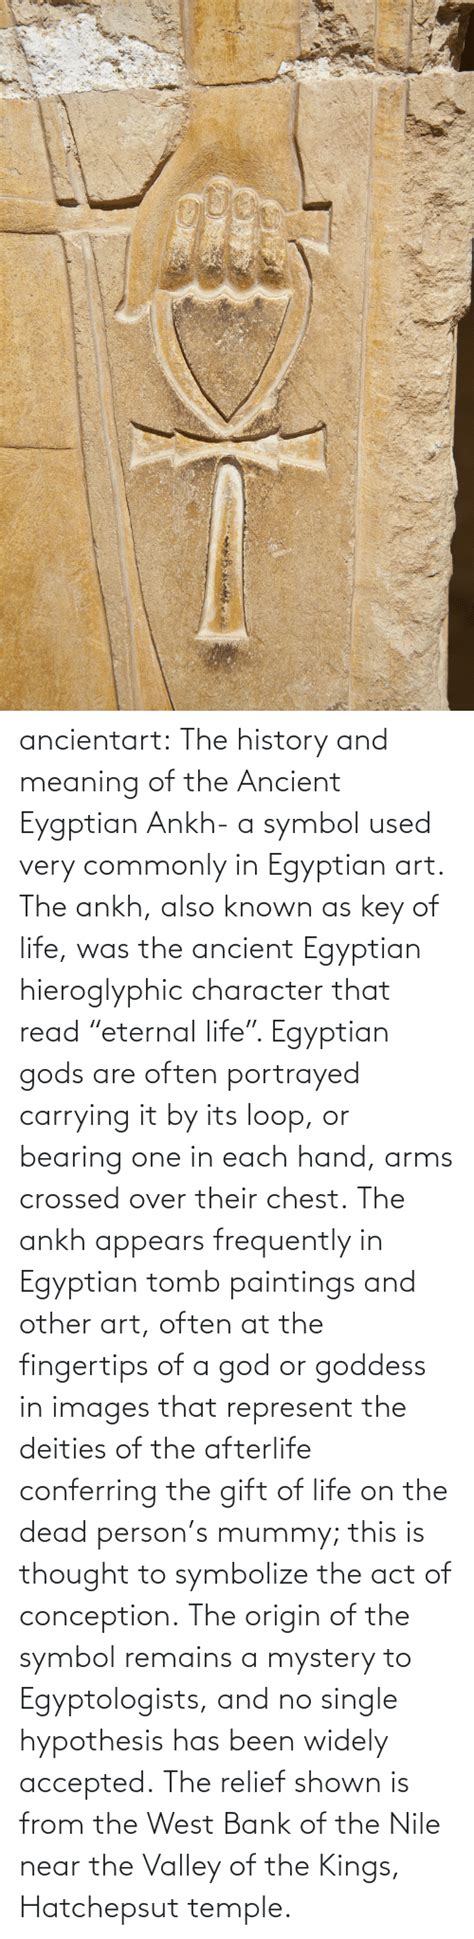 Ancientart The History And Meaning Of The Ancient Eygptian Ankh A